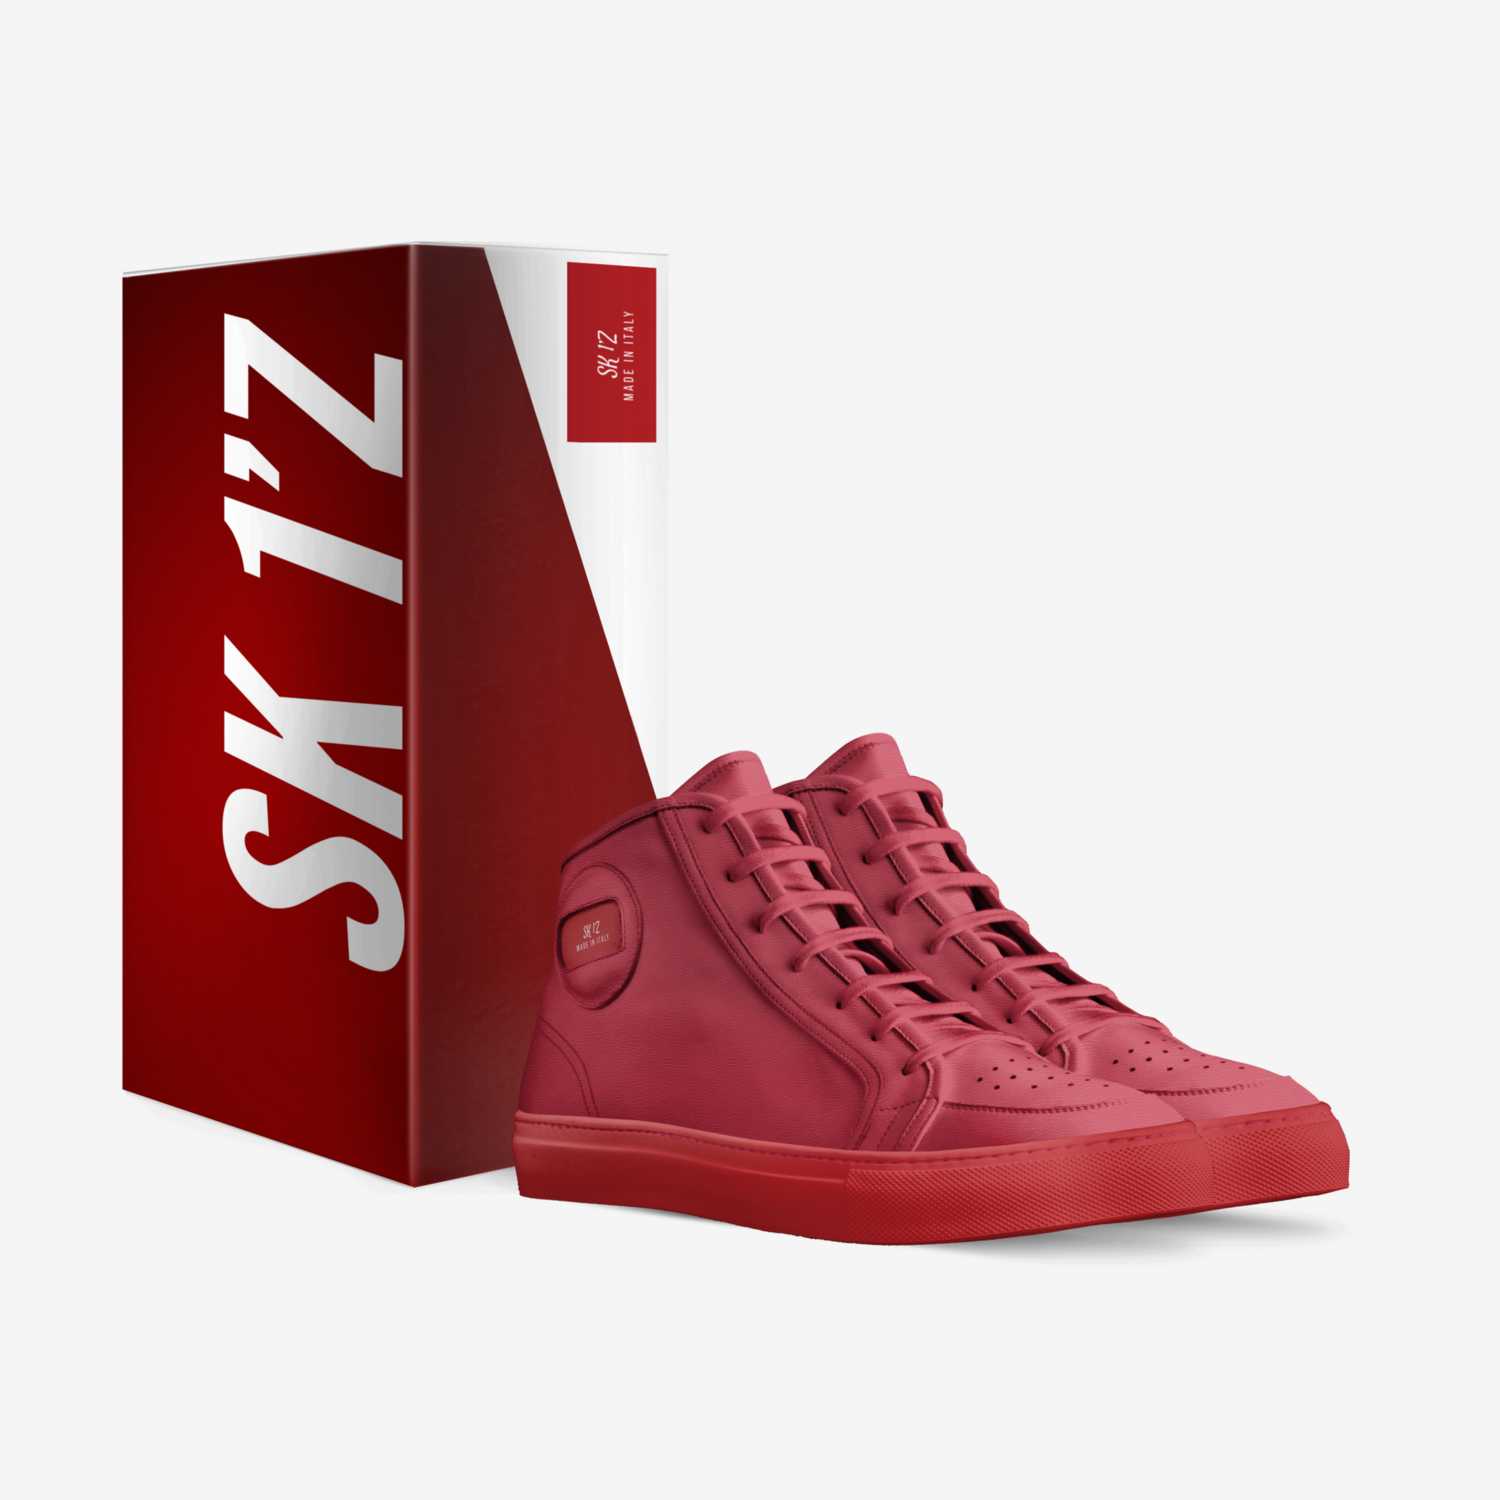 SK 1’Z custom made in Italy shoes by Sheikh Khaled | Box view